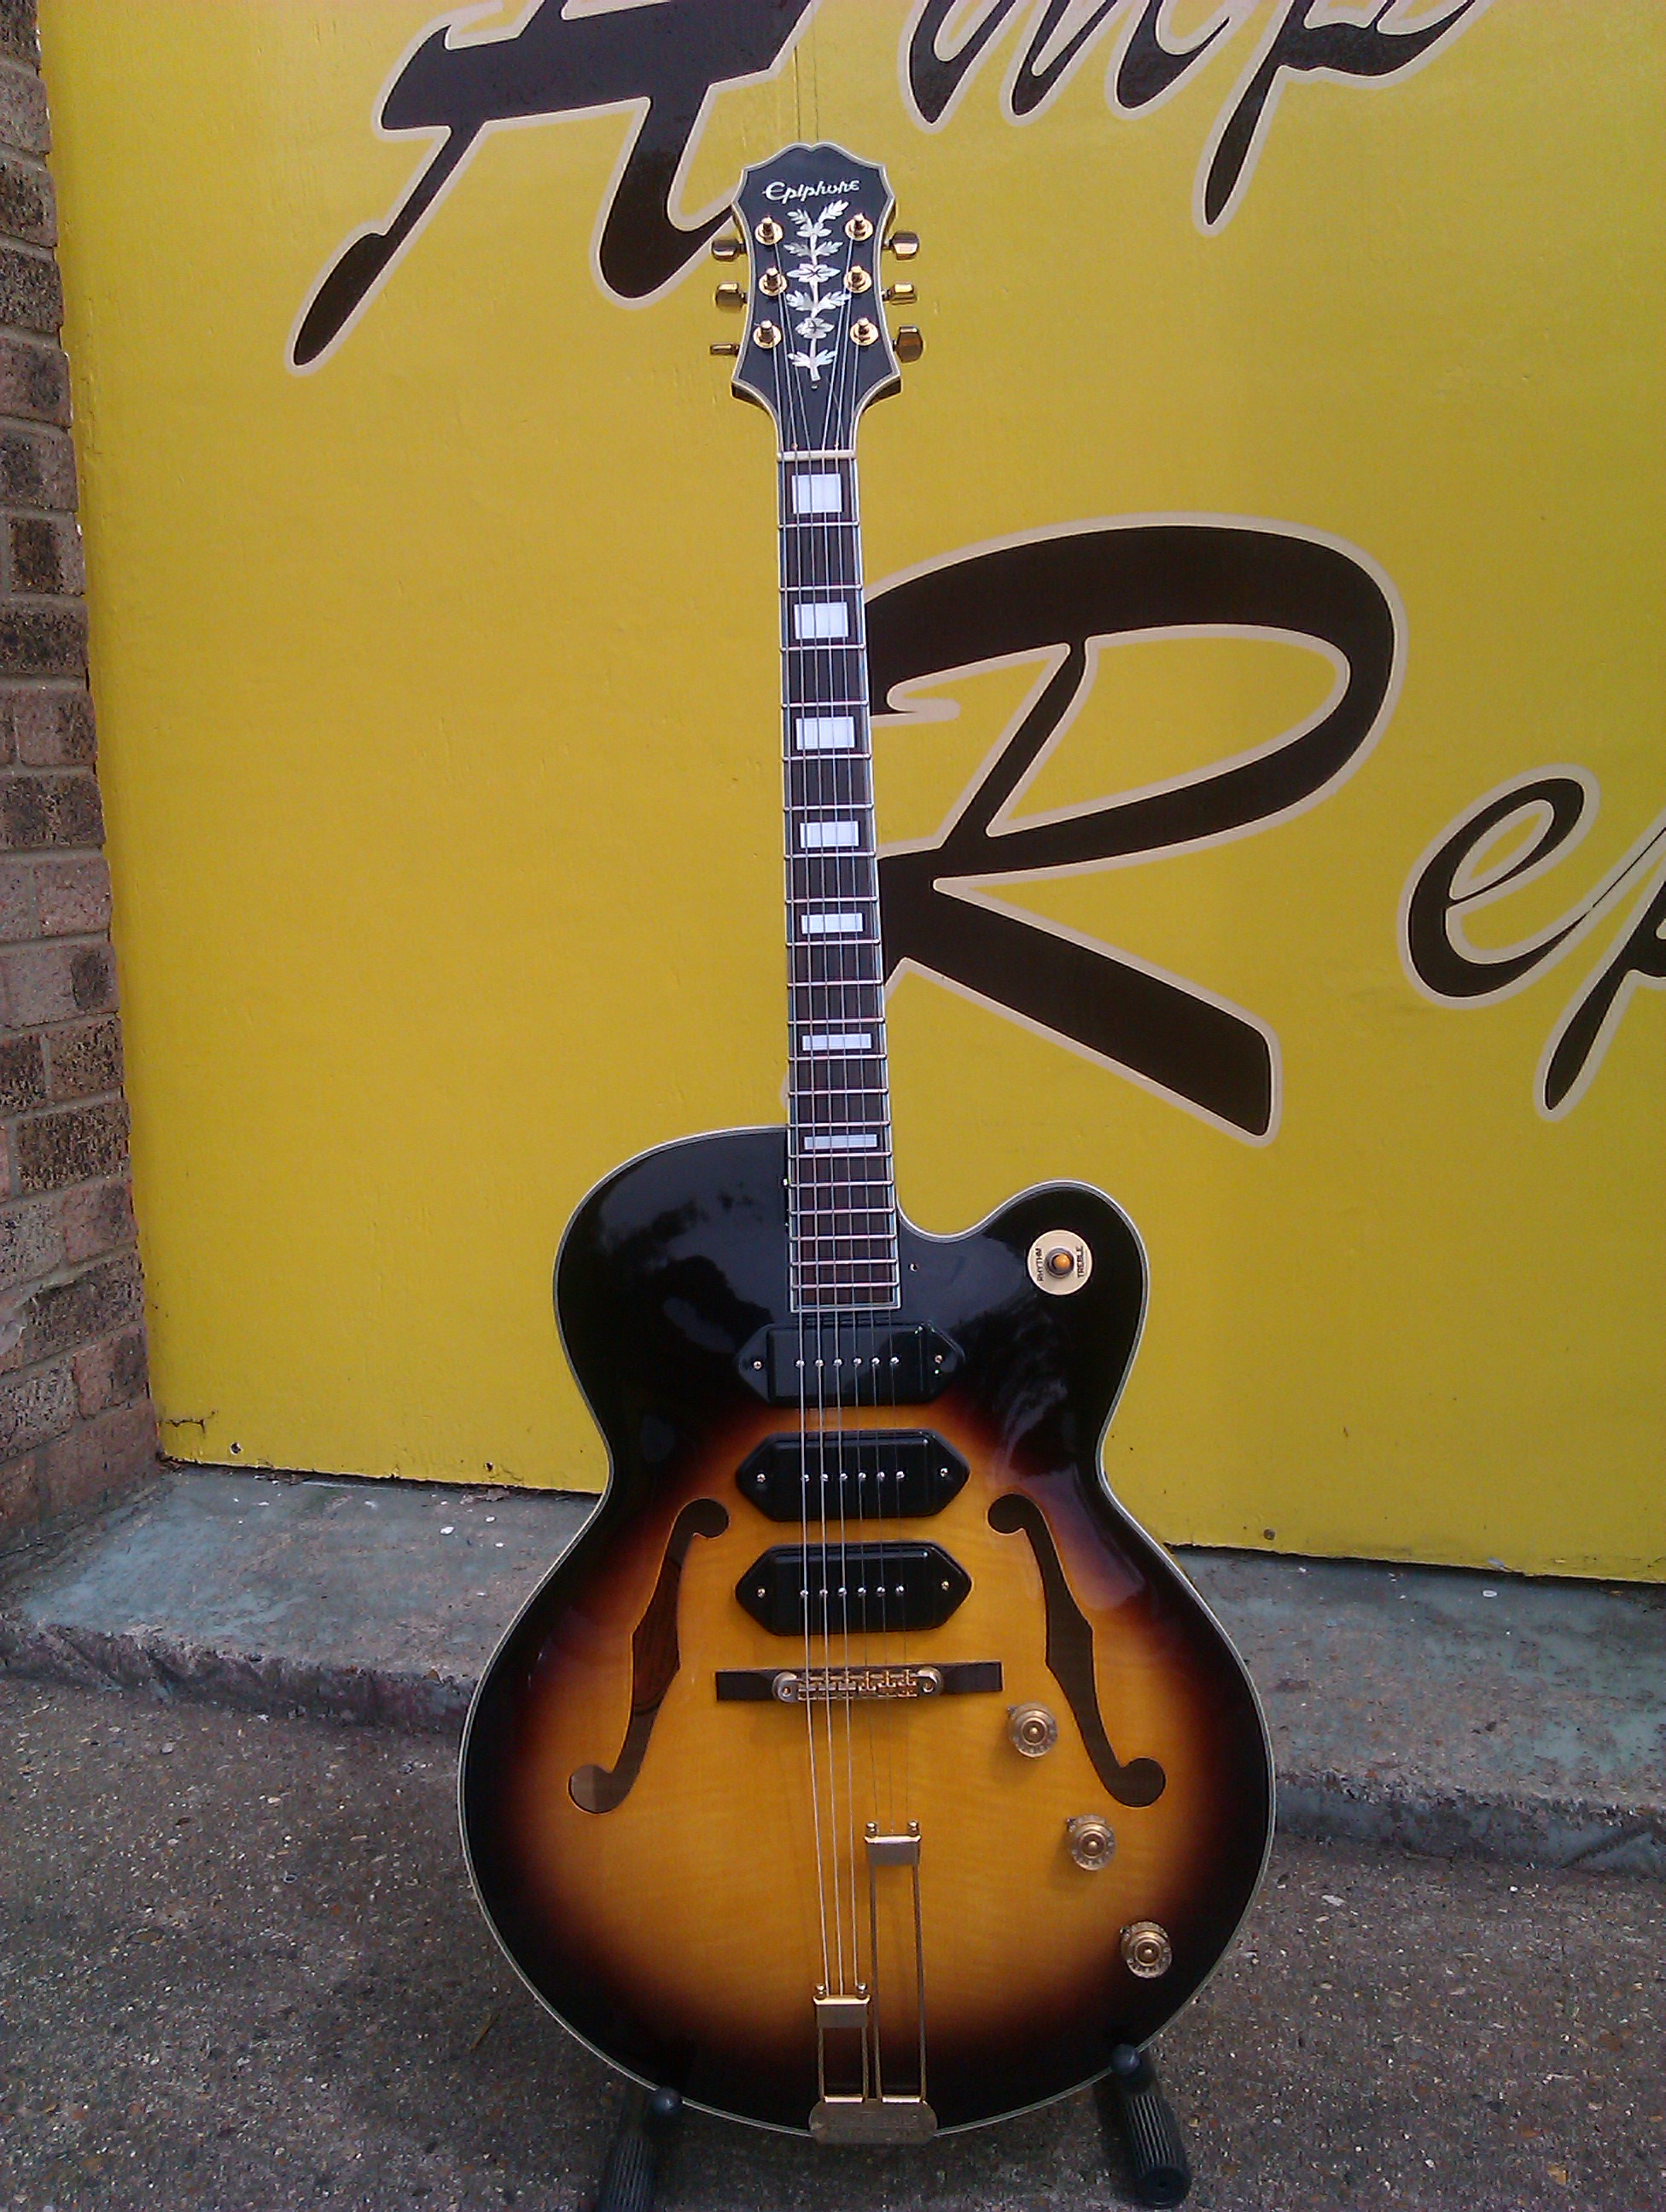 A nice blues/jazz guitar from Epiphone